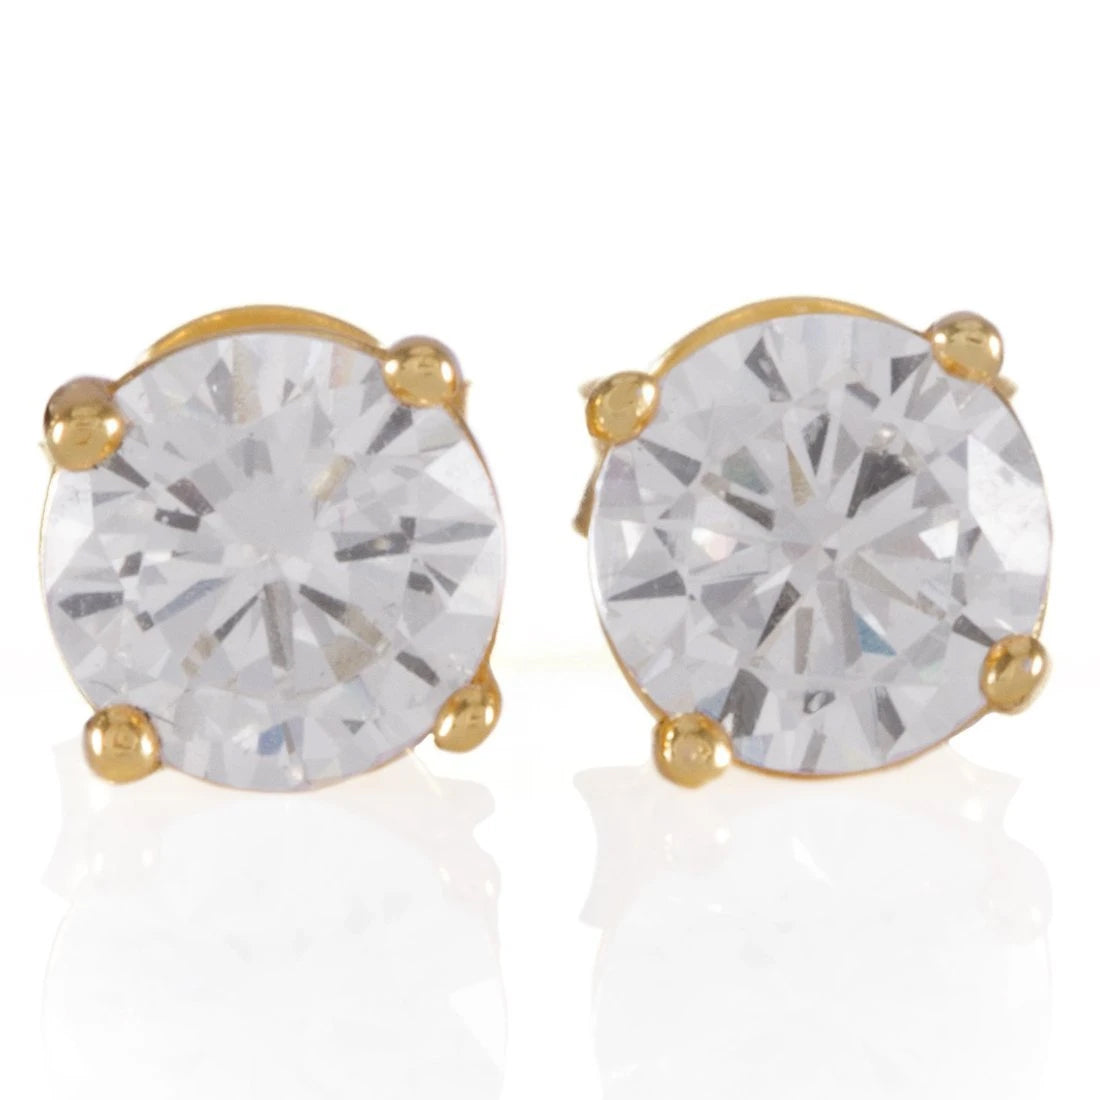 KING ICE .925 STERLING SILVER GOLD CLEAR ROUND STUD EARRINGS